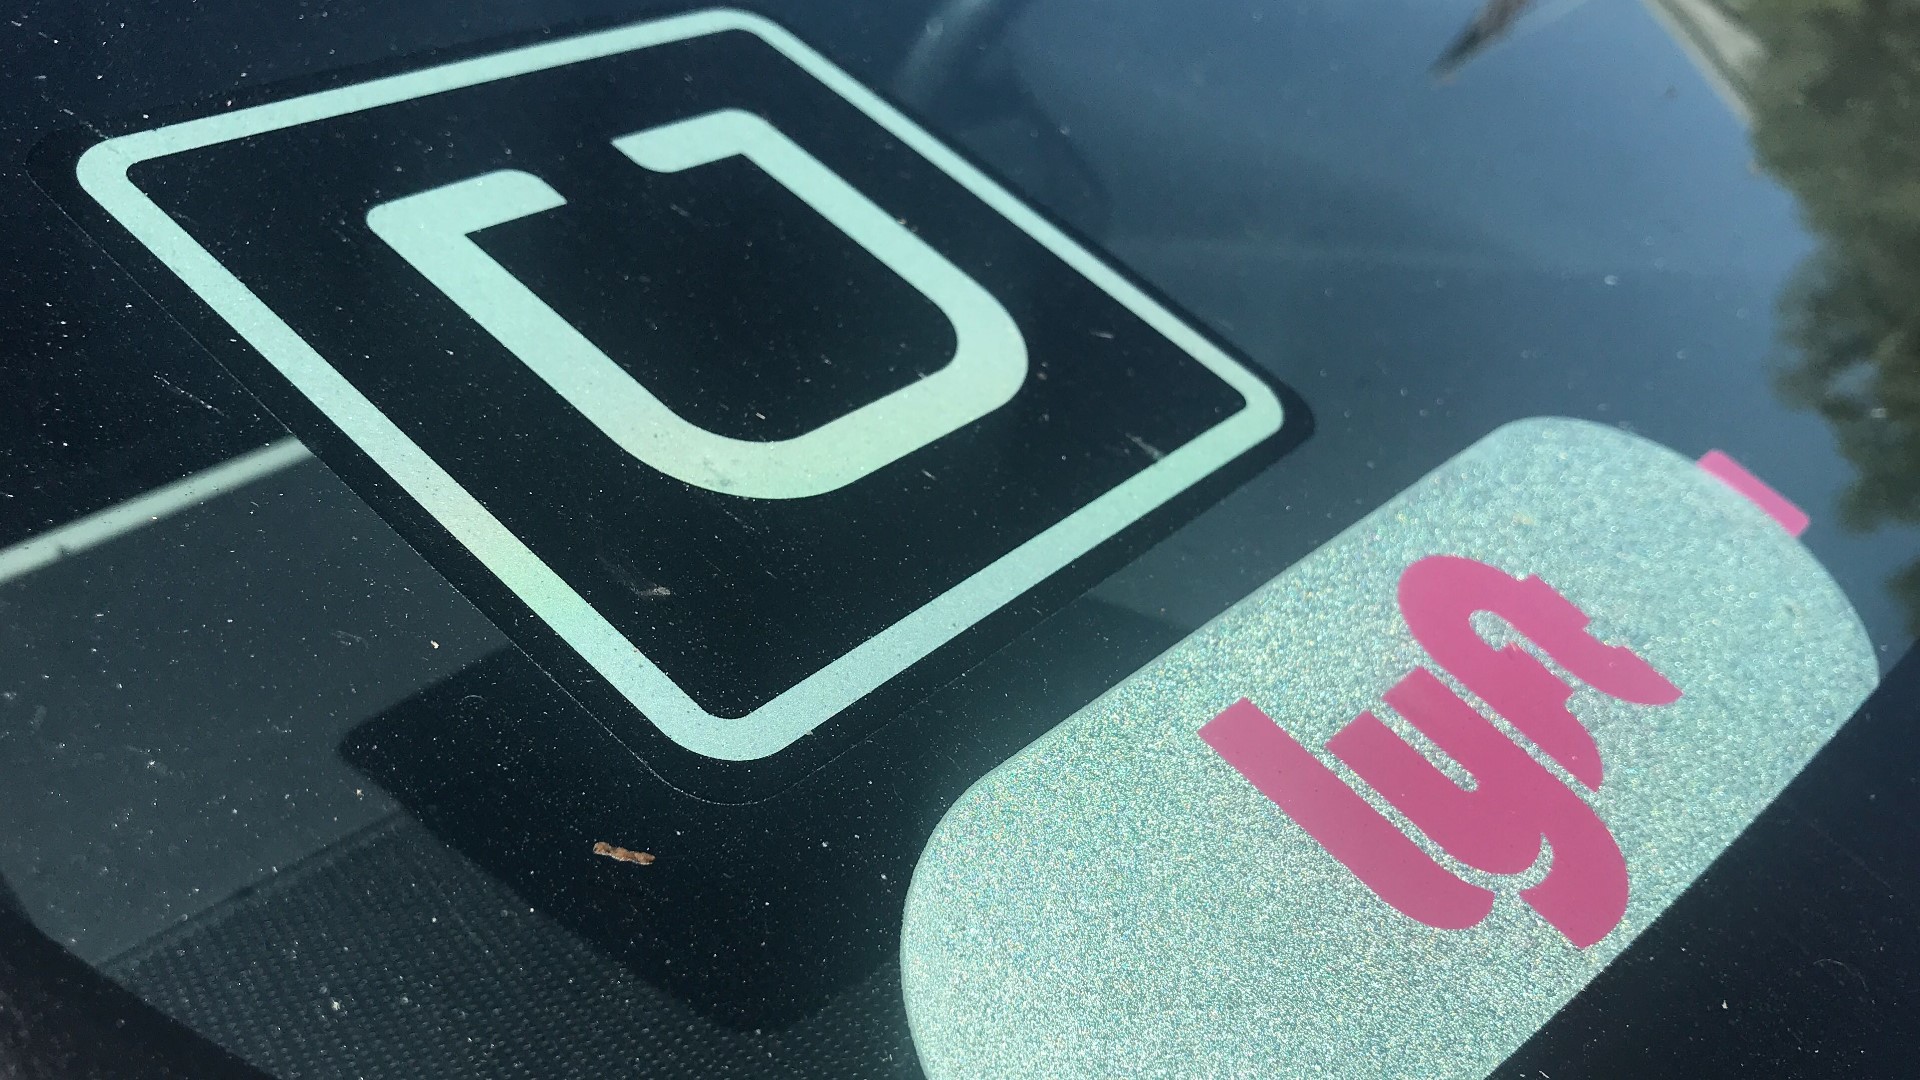 Rideshare drivers rallied at the state capitol Wednesday for Assembly Bill 5, which could dramatically change how app-based companies like Uber and Lyft treat their workers.